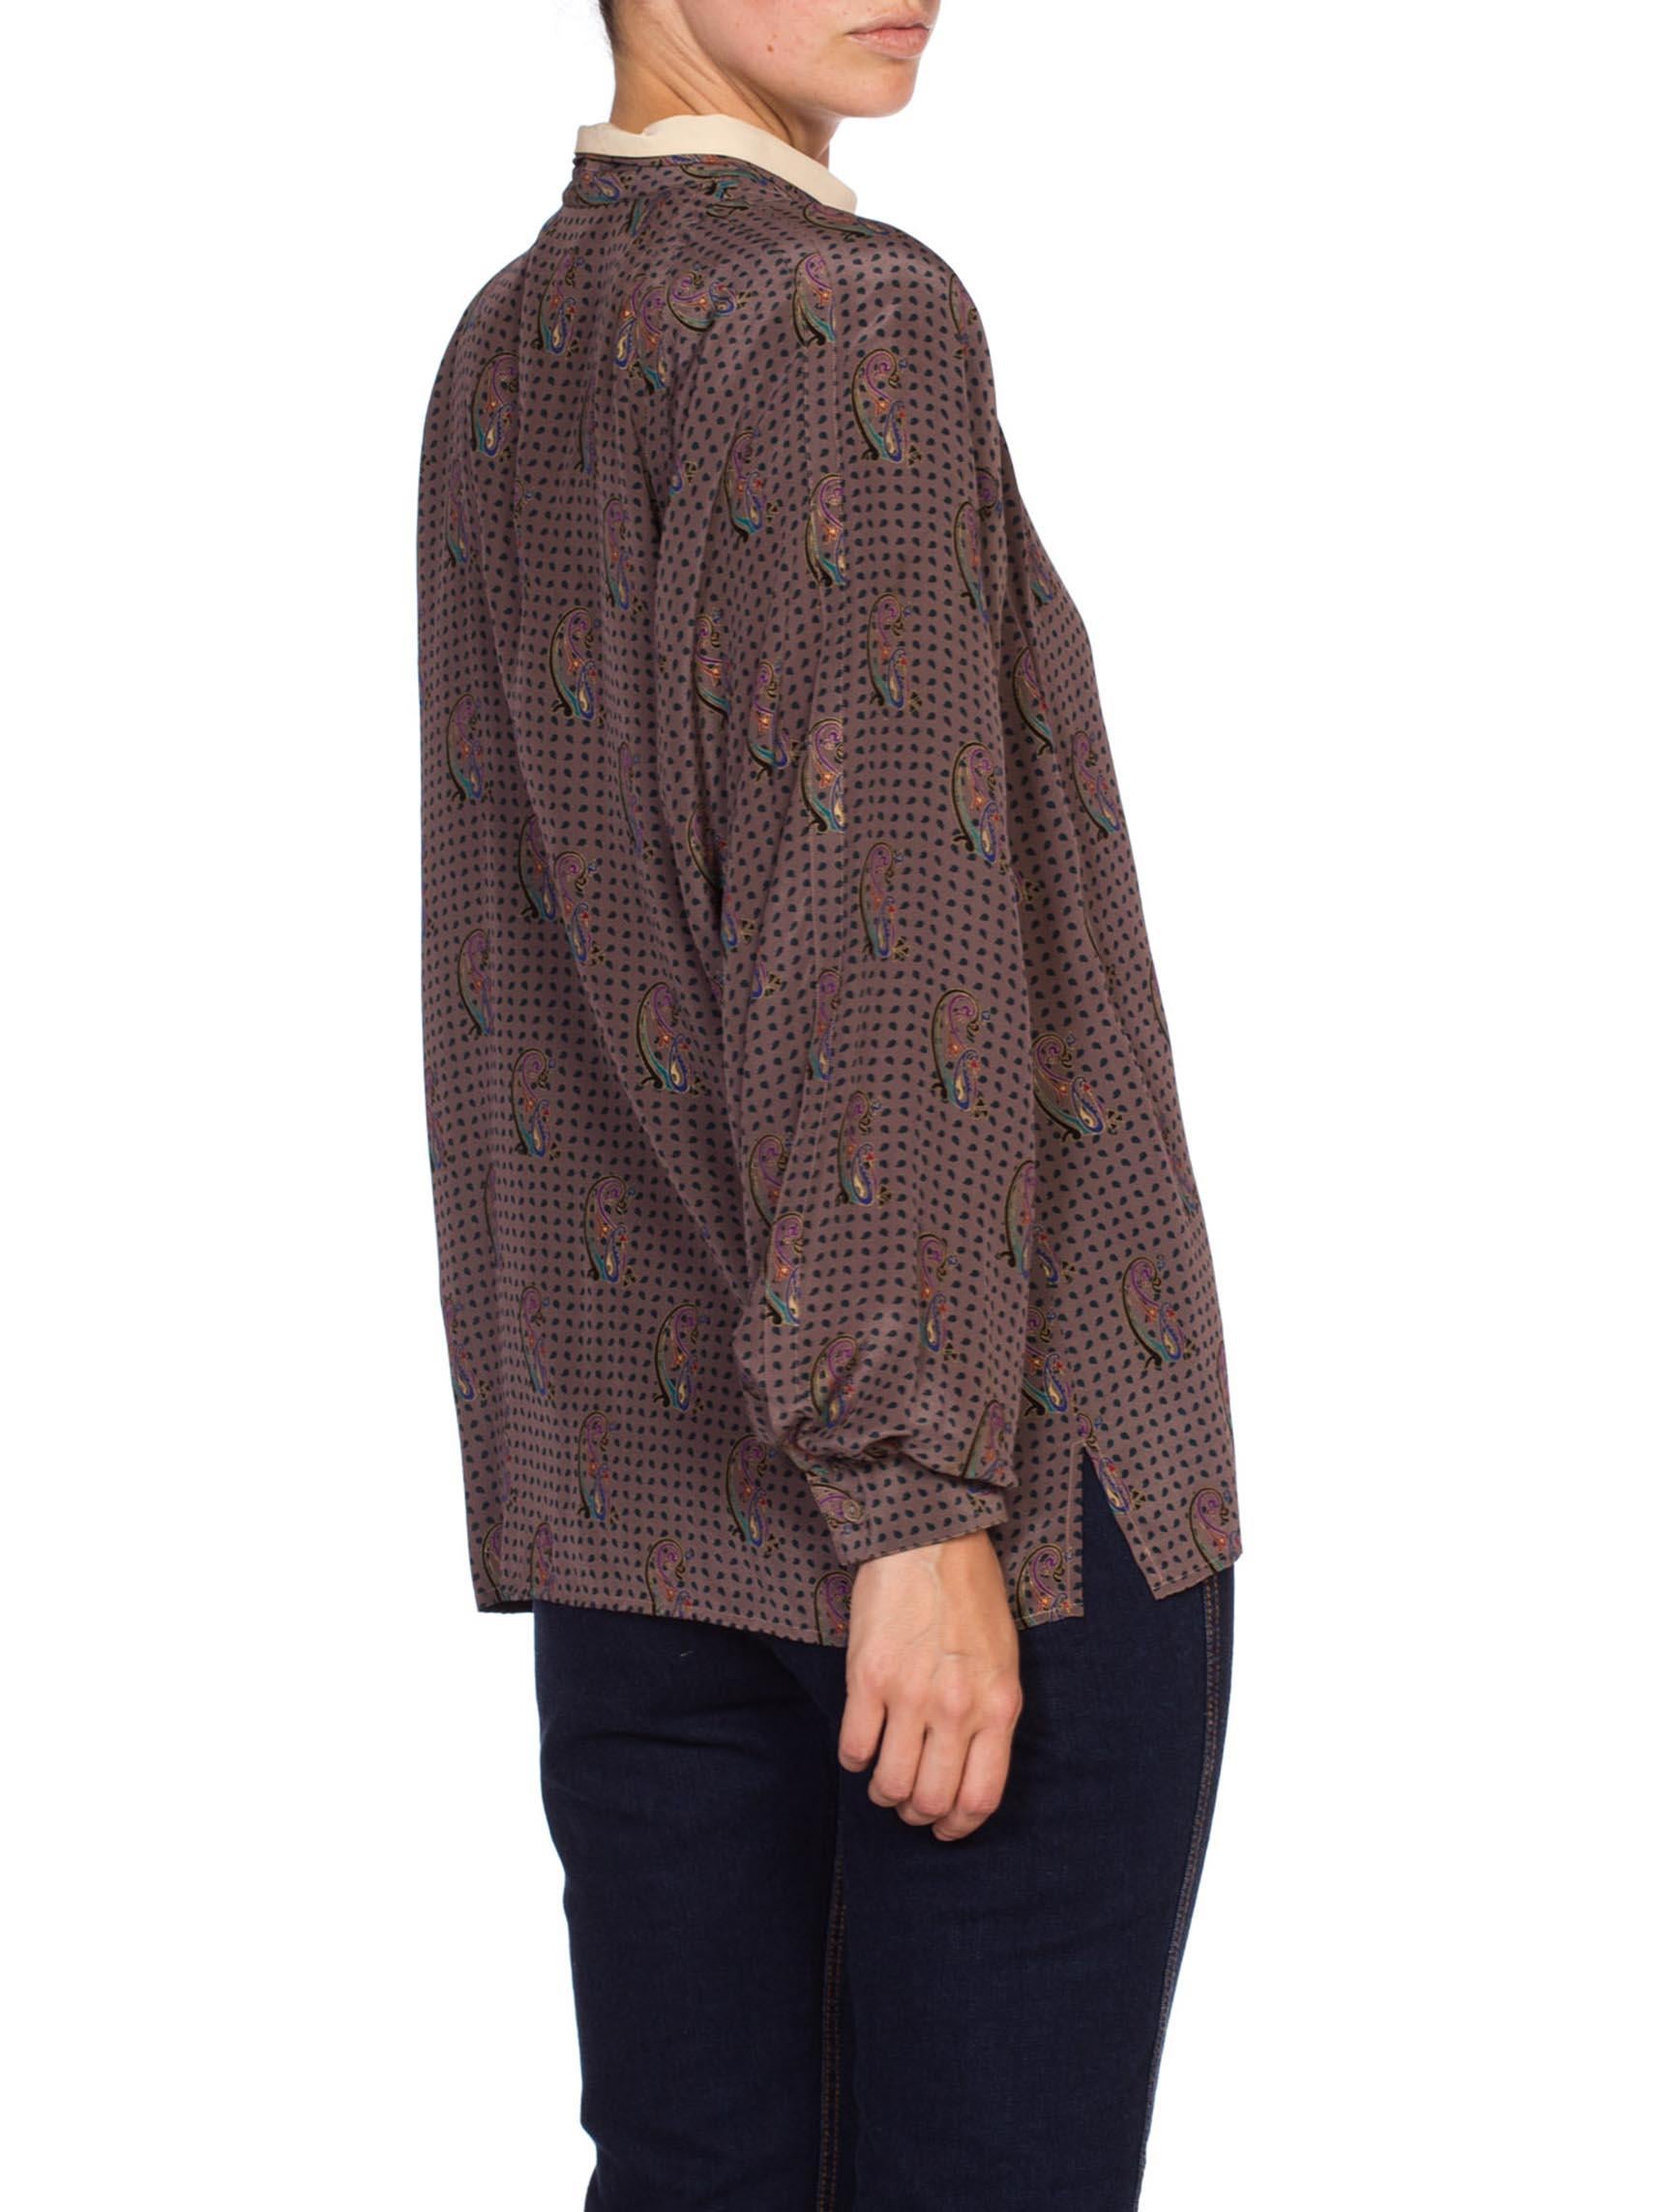 1970'S GUCCI Paisley Silk Blouse With Metallic Gold Print Top For Sale 5